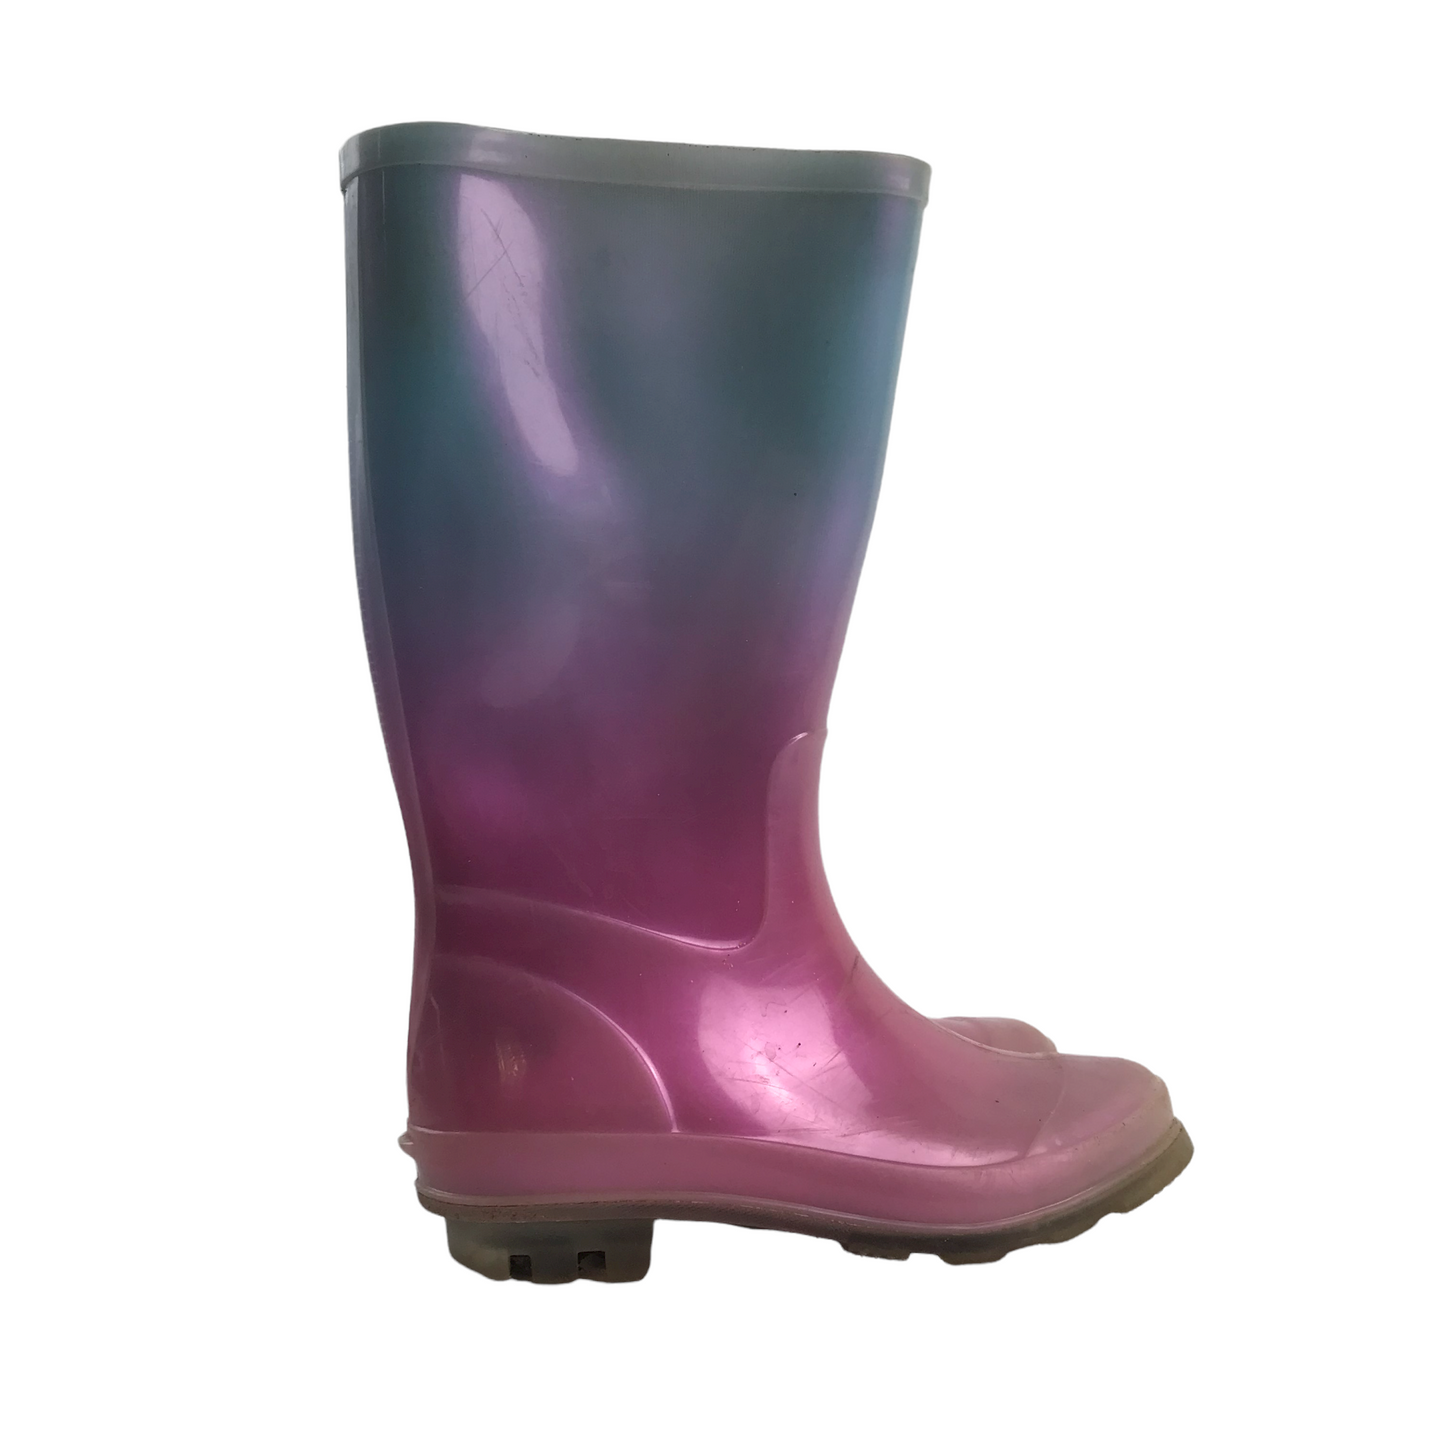 Pastel Blue and Pink  Wellies Shoe Size 11 (jr)